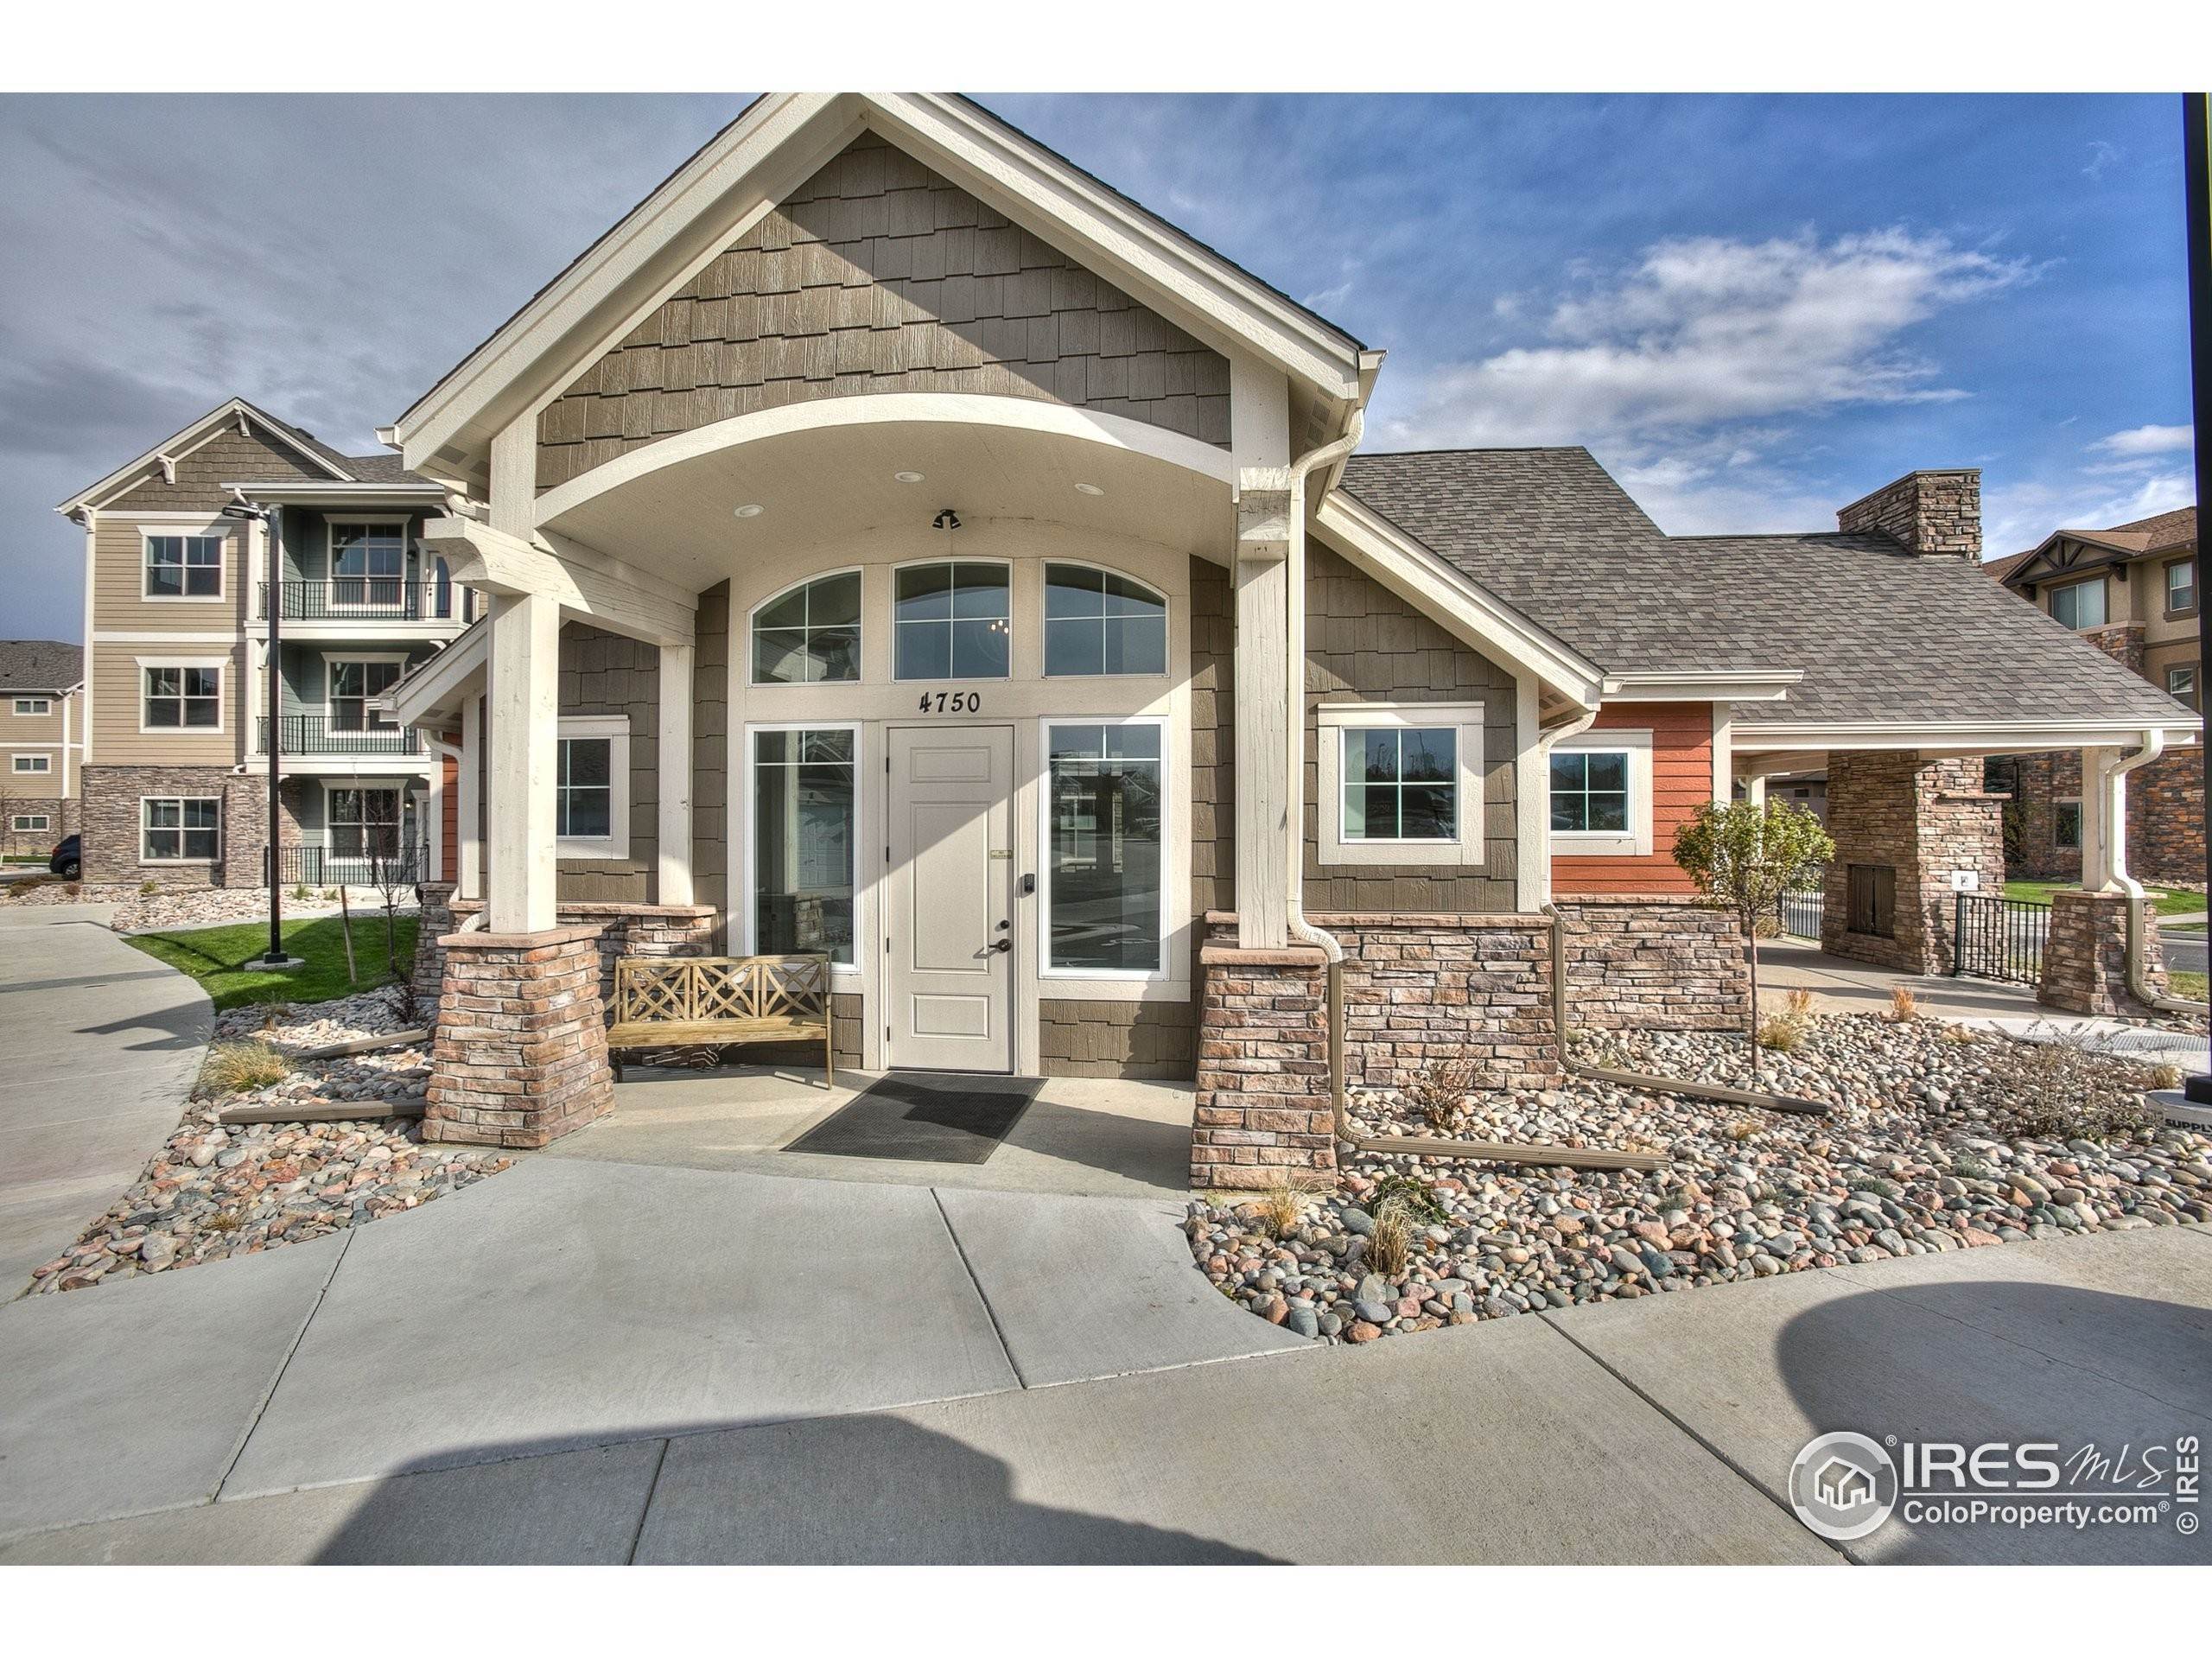 2. Single Family Homes for Active at 4622 Hahns Peak Drive 104 Loveland, Colorado 80538 United States